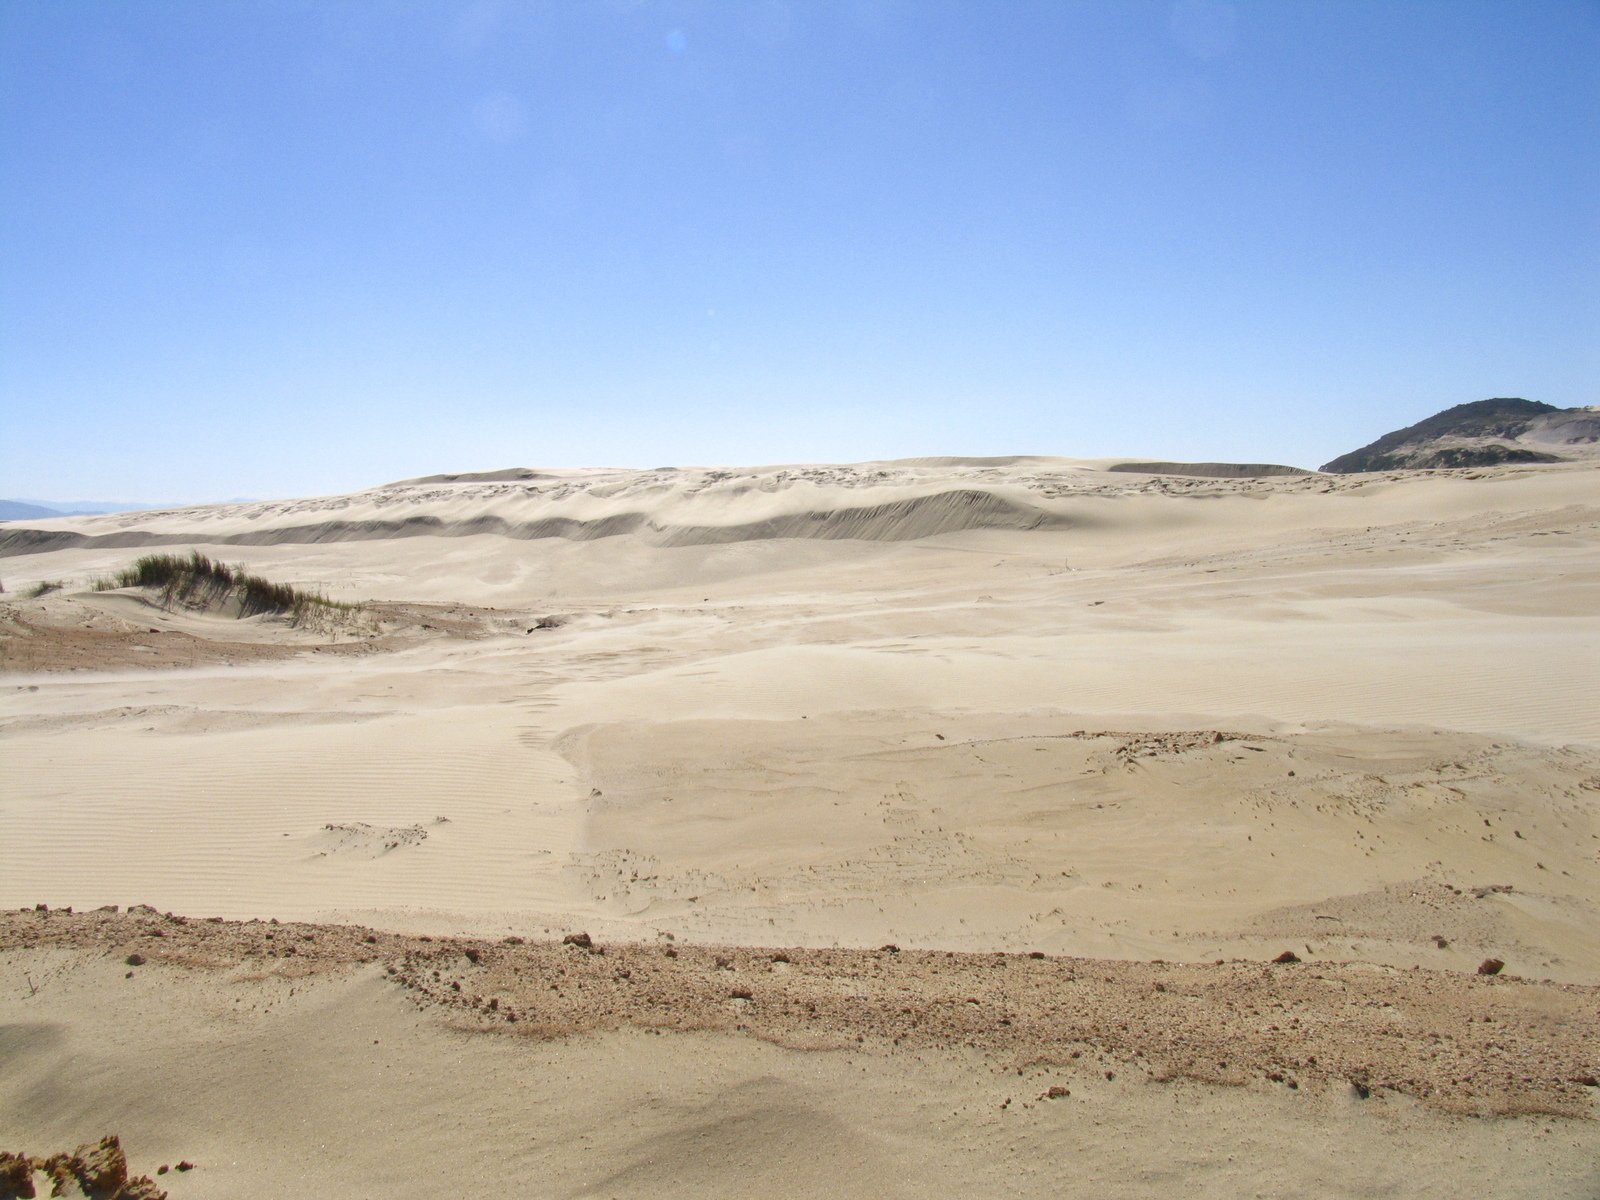 the view over an expanse of sand dunes and a hill in the distance